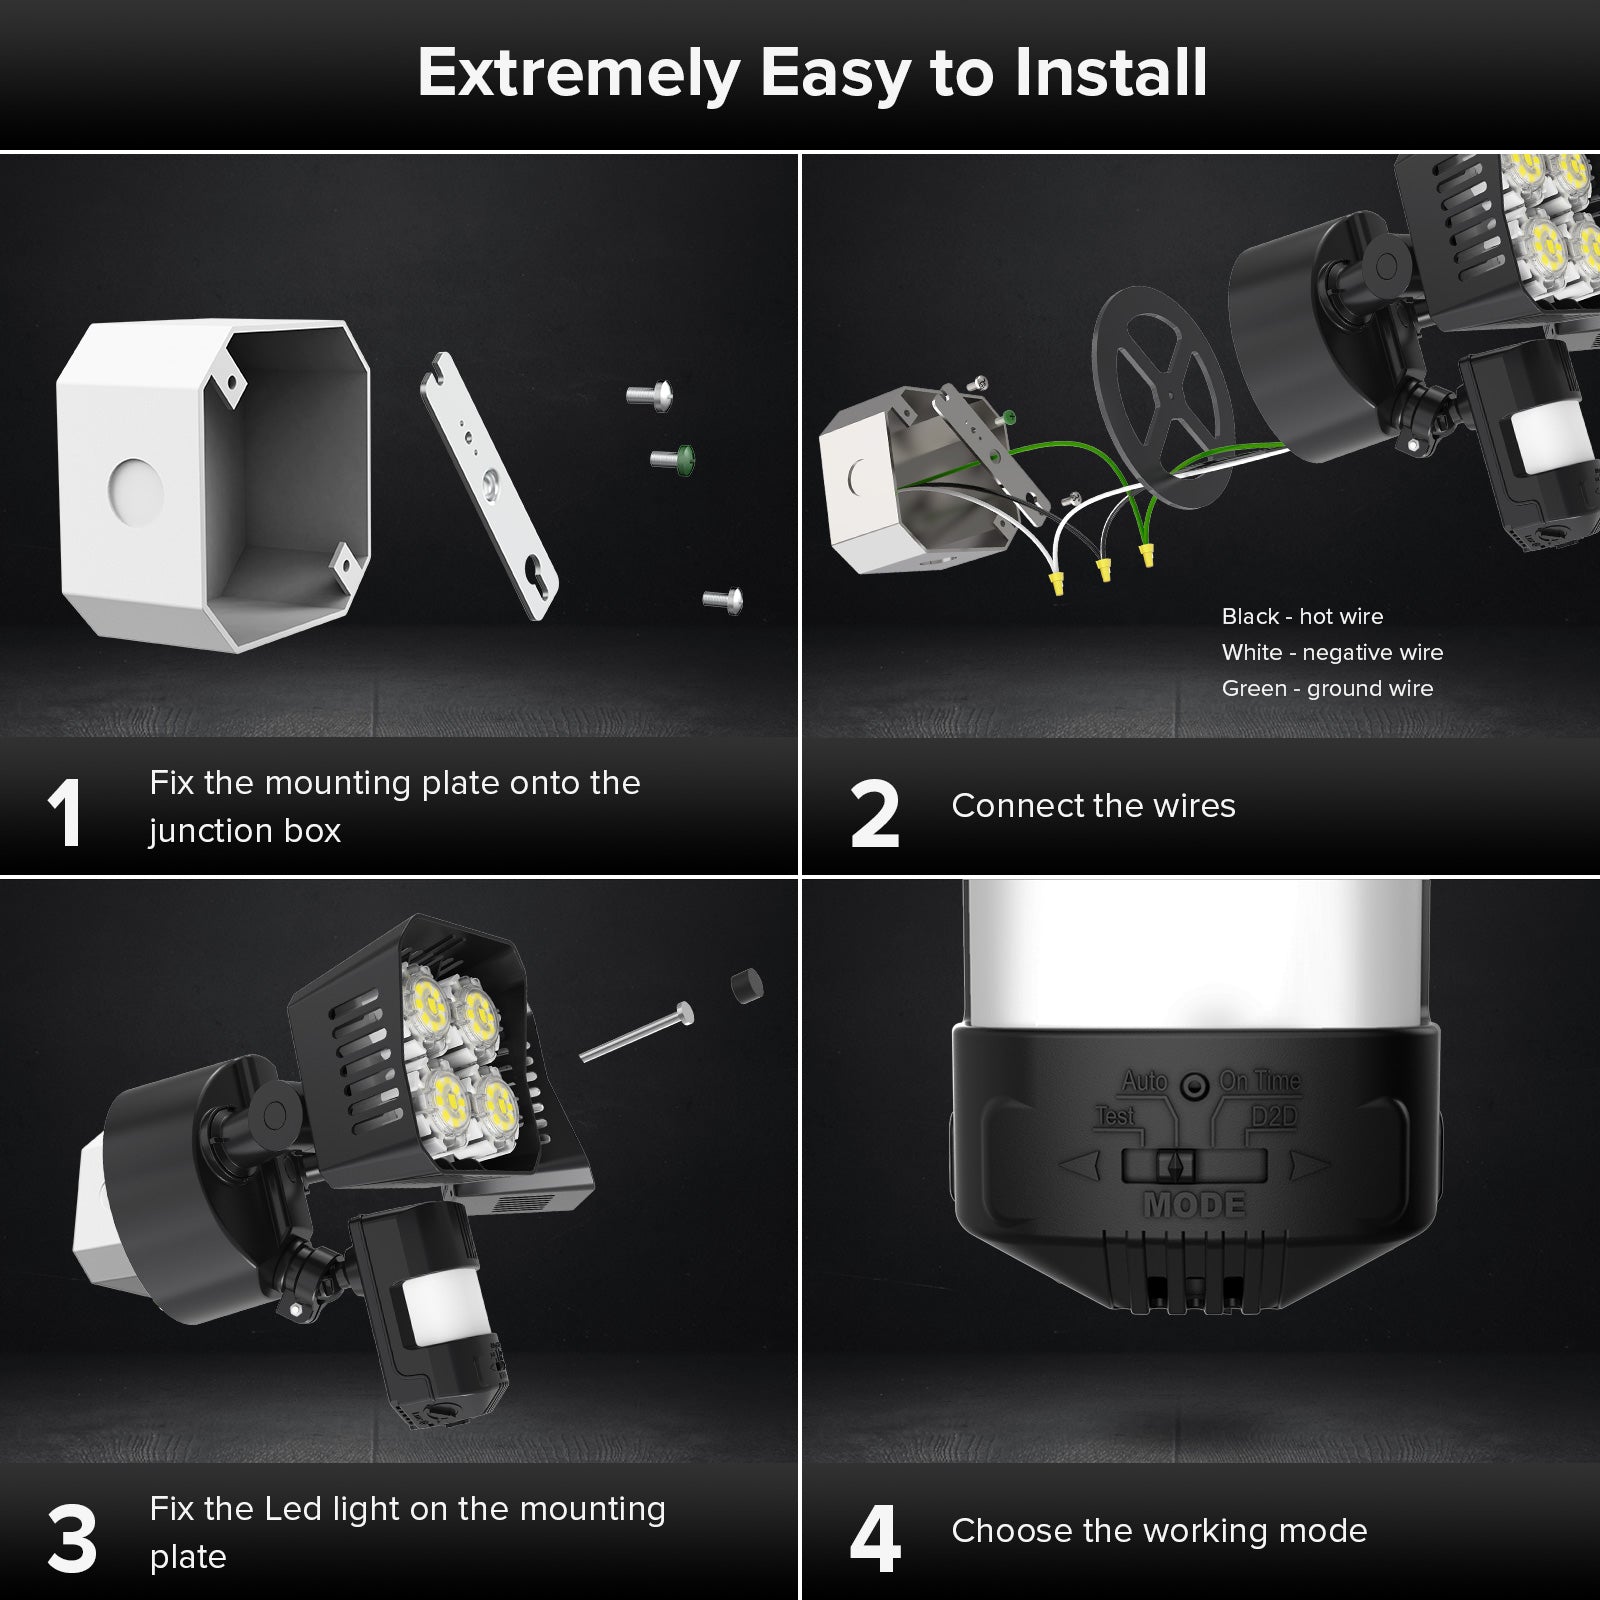 Square 36W LED Security Light (Dusk to Dawn & Motion Sensor) is extremely easy to install